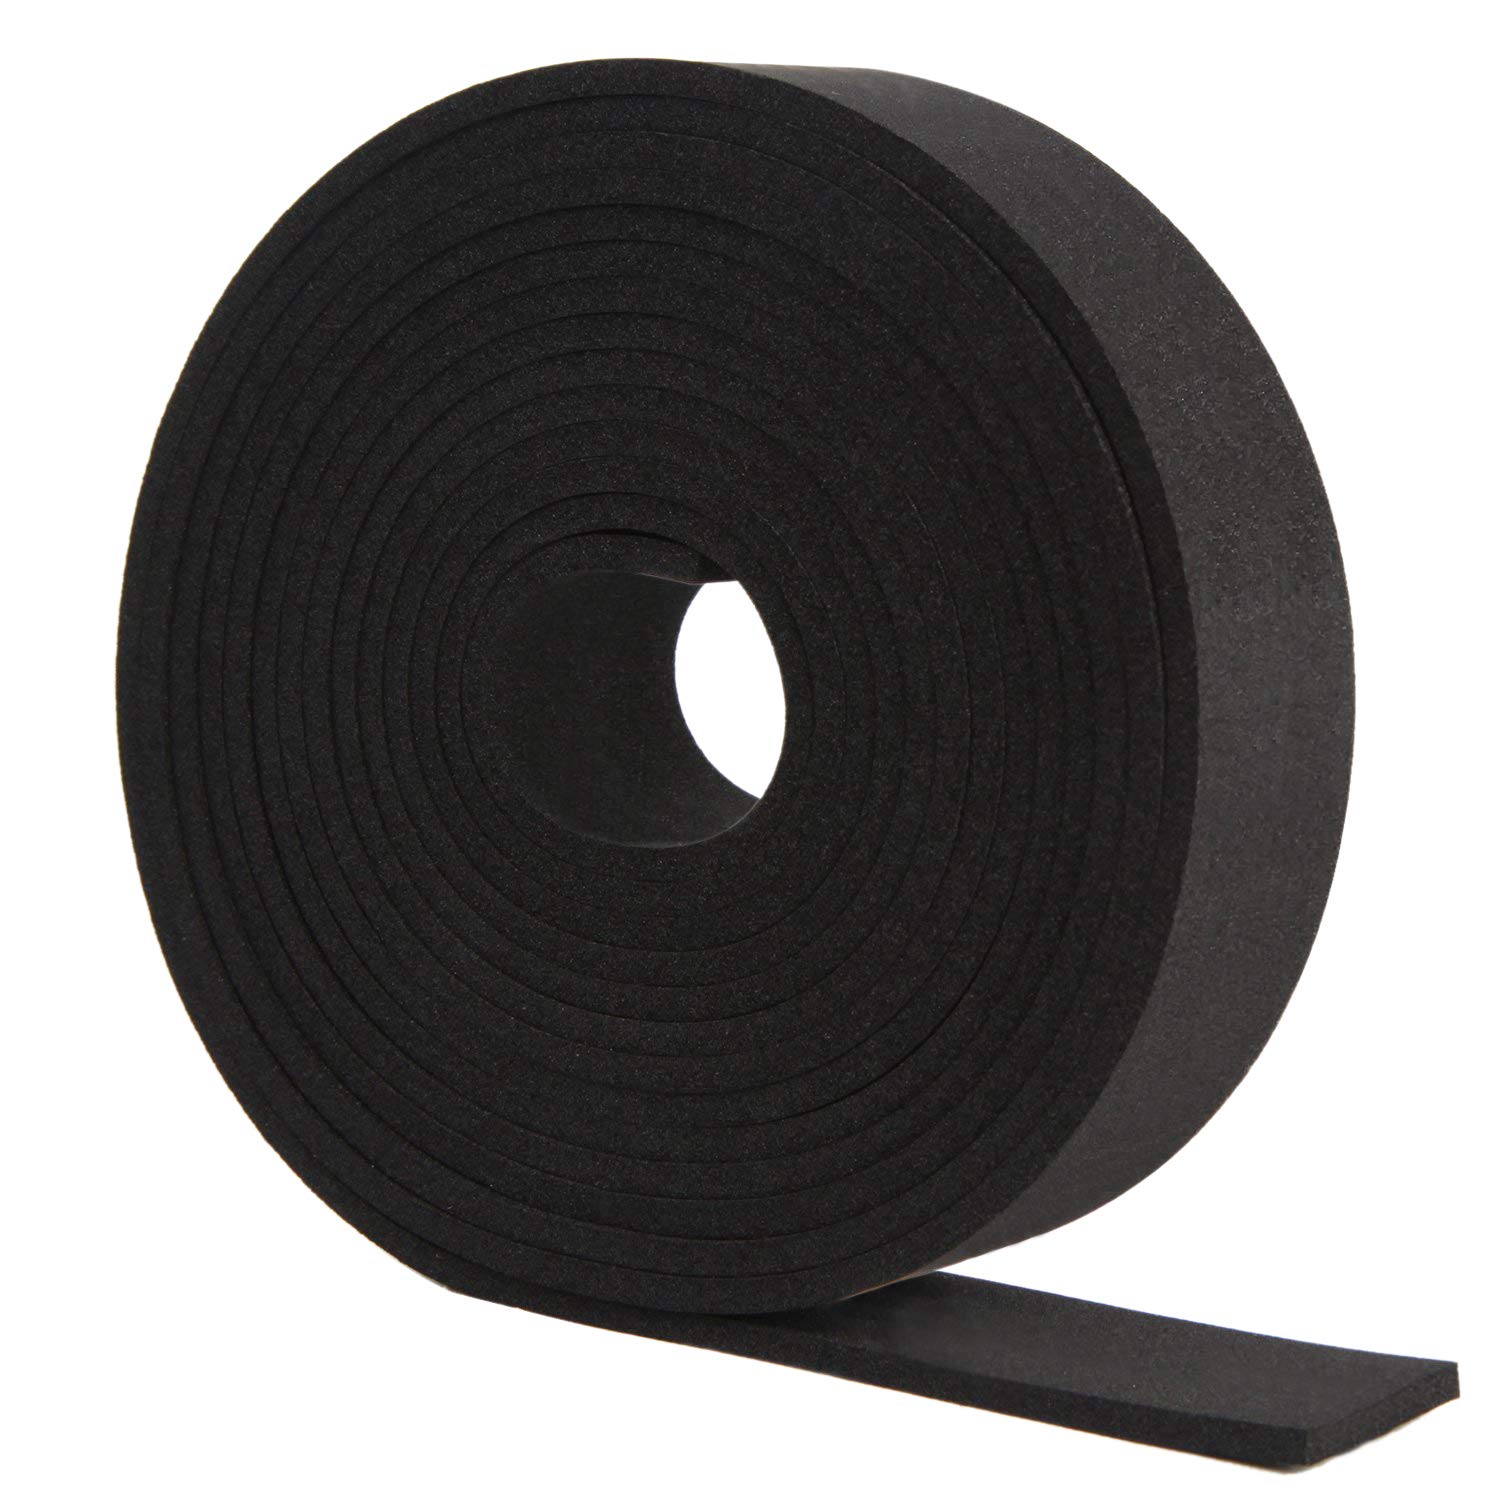 Neoprene Foam Strip Roll by Dualplex, 2 Wide x 10' Long x 1/16 Thick,  Weather Seal High Density Stripping Non Adhesive - Weath